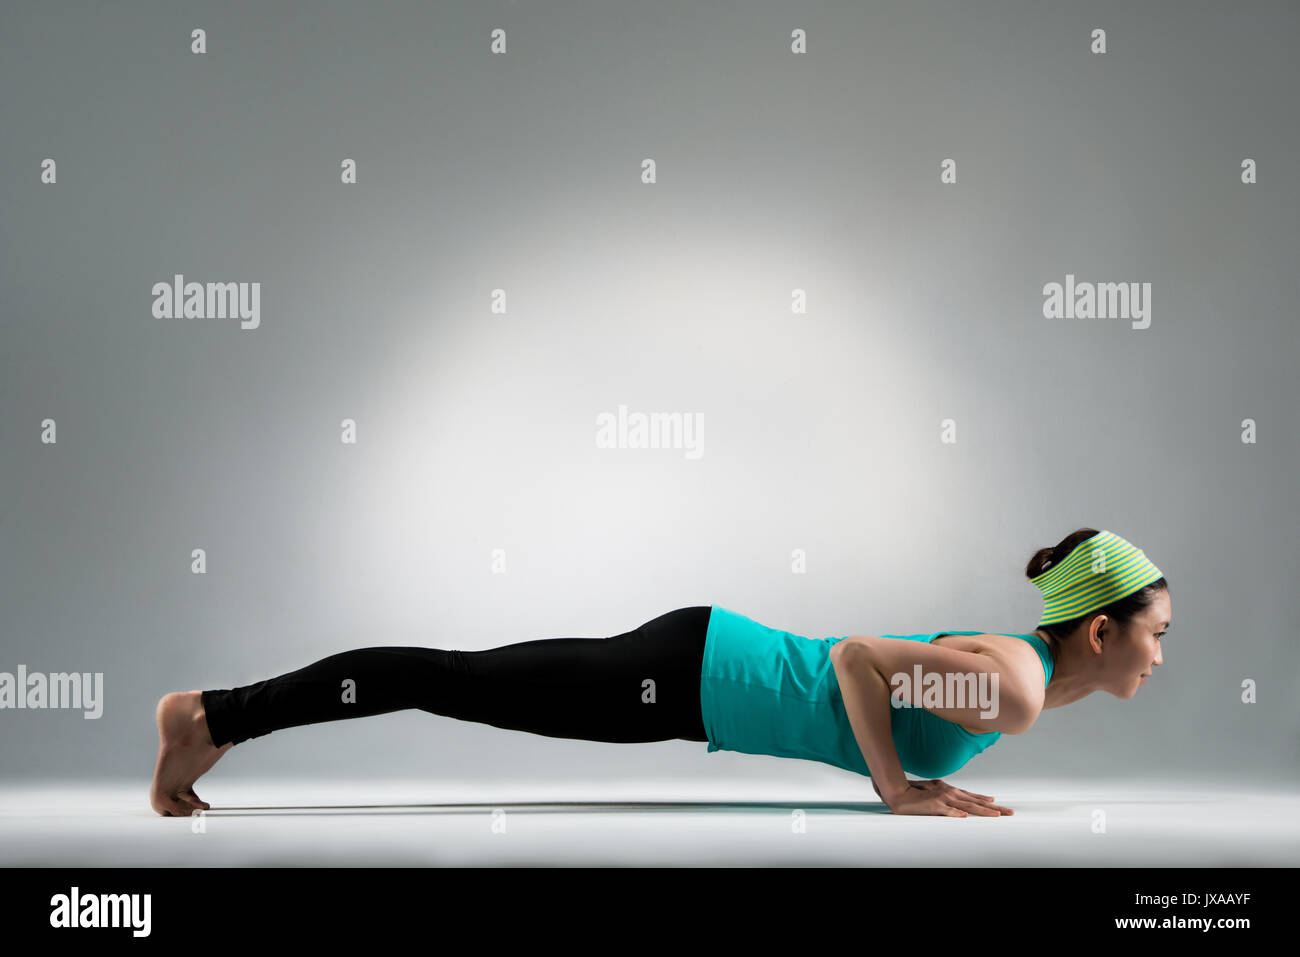 smiling gymnastic female player lying on ground floor hands up body performing pushup posture at yoga fitness center studio with gray wall background. Stock Photo